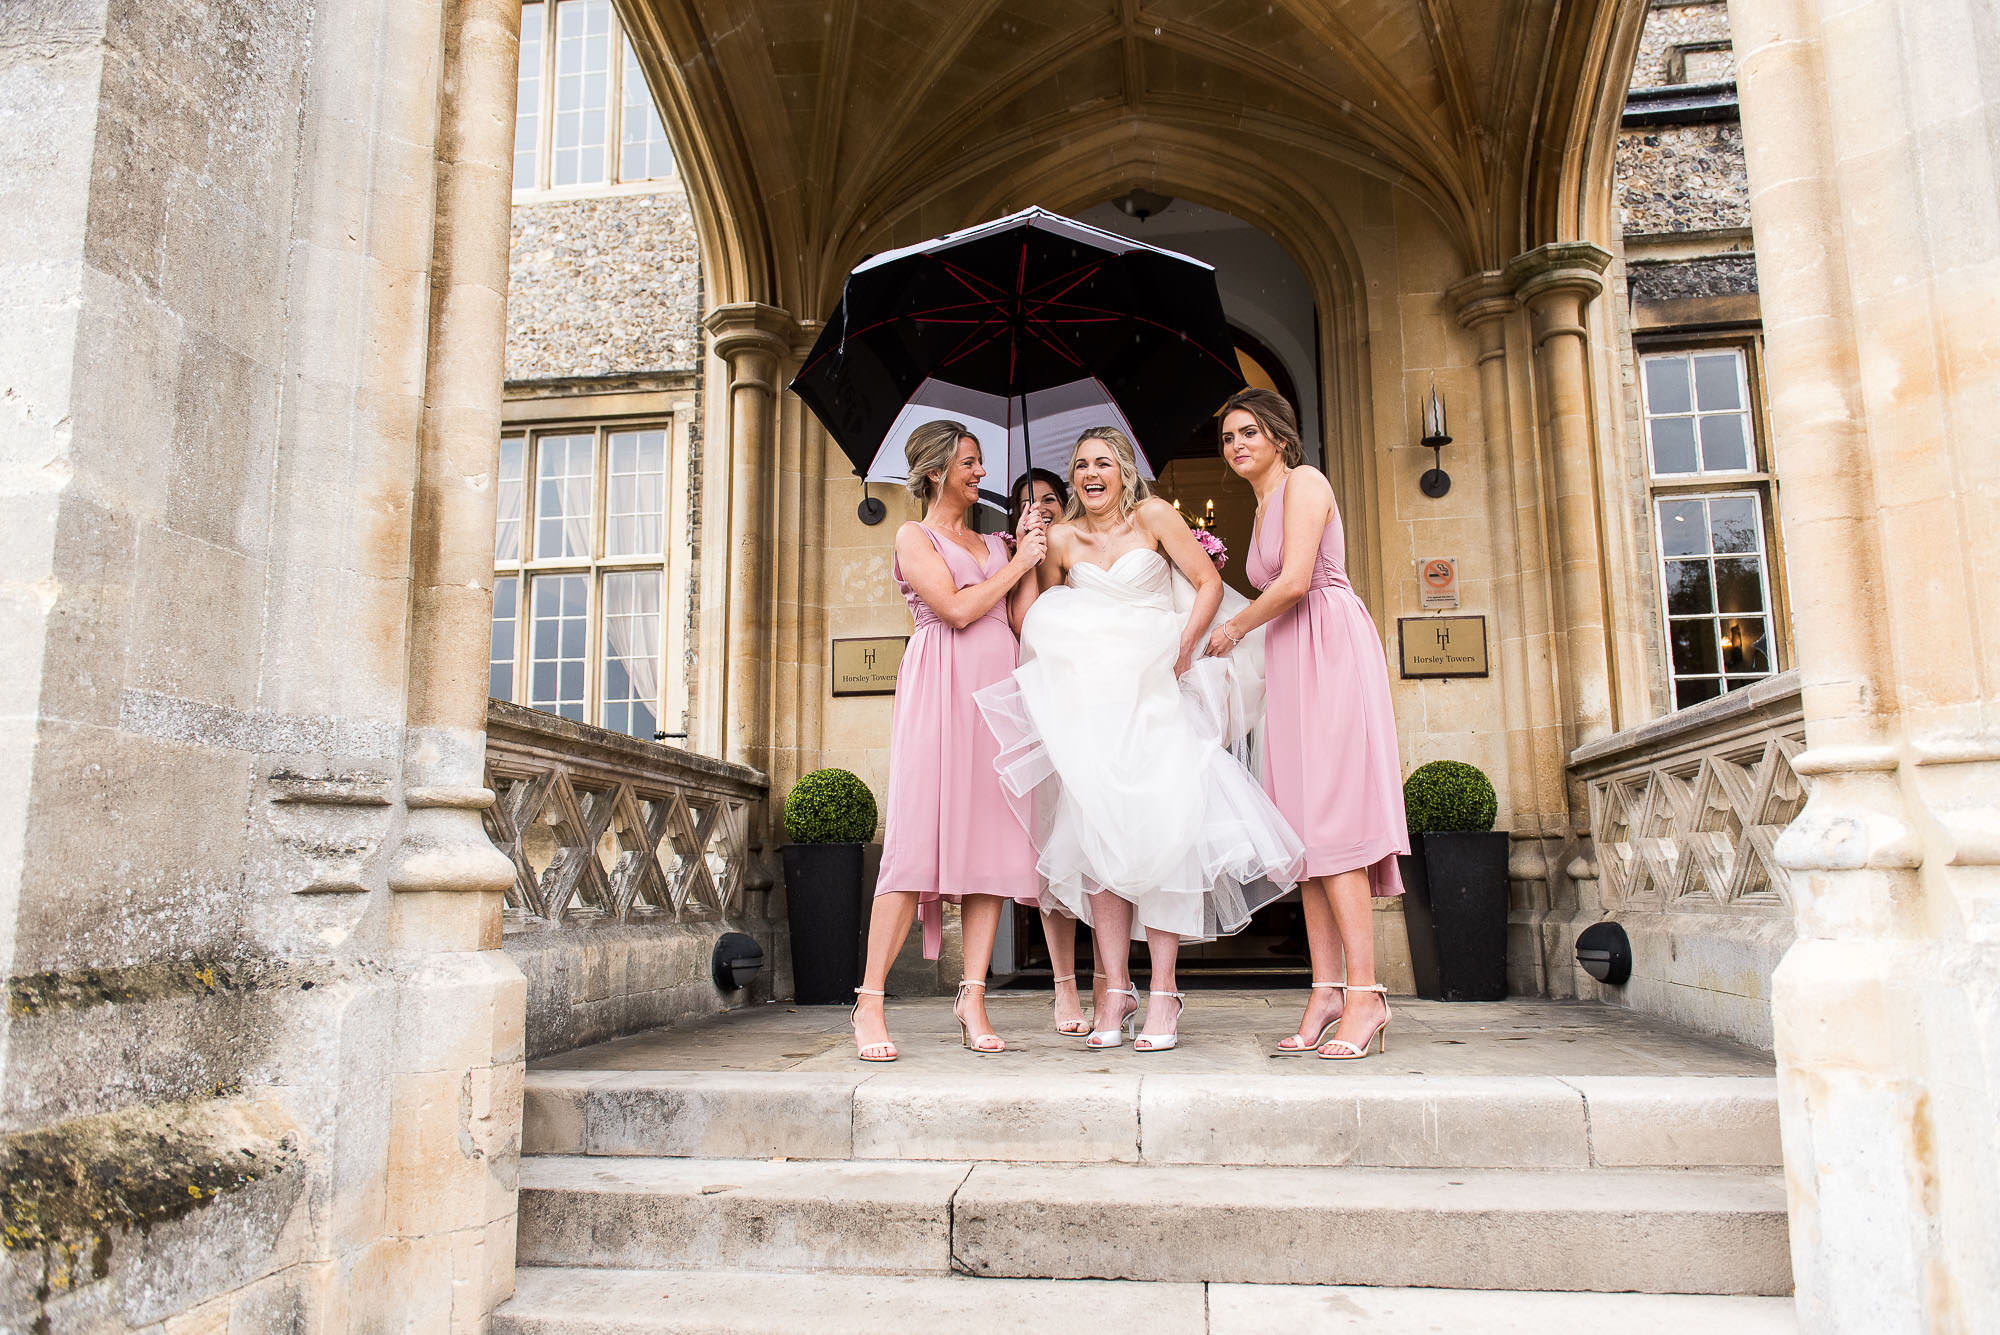 Fun wedding photography, gorgeous laughing bride being helped to the car in the rain by her bridesmaids